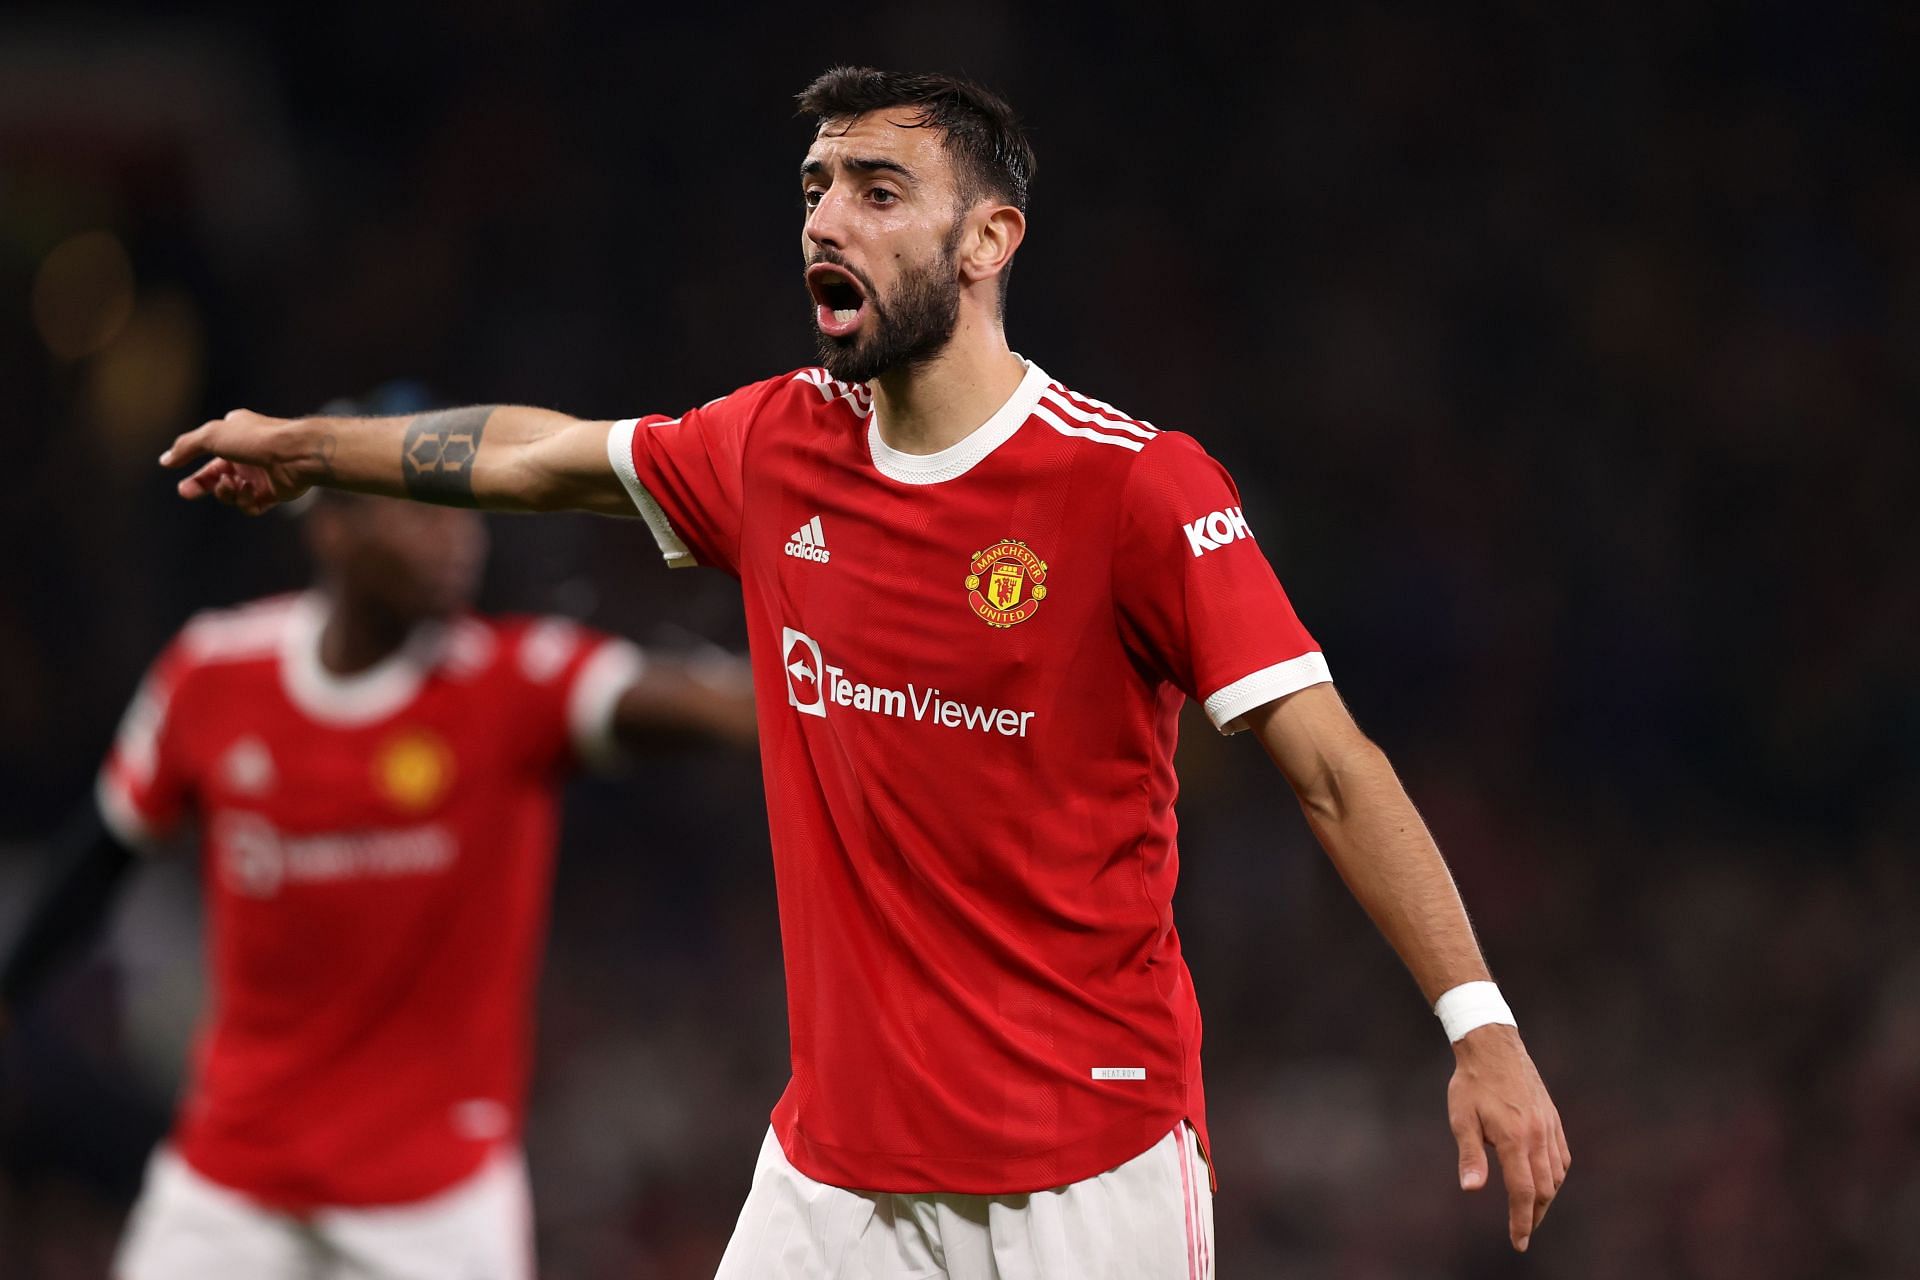 Bruno Fernandes has enjoyed a highly creative spell with Manchester United